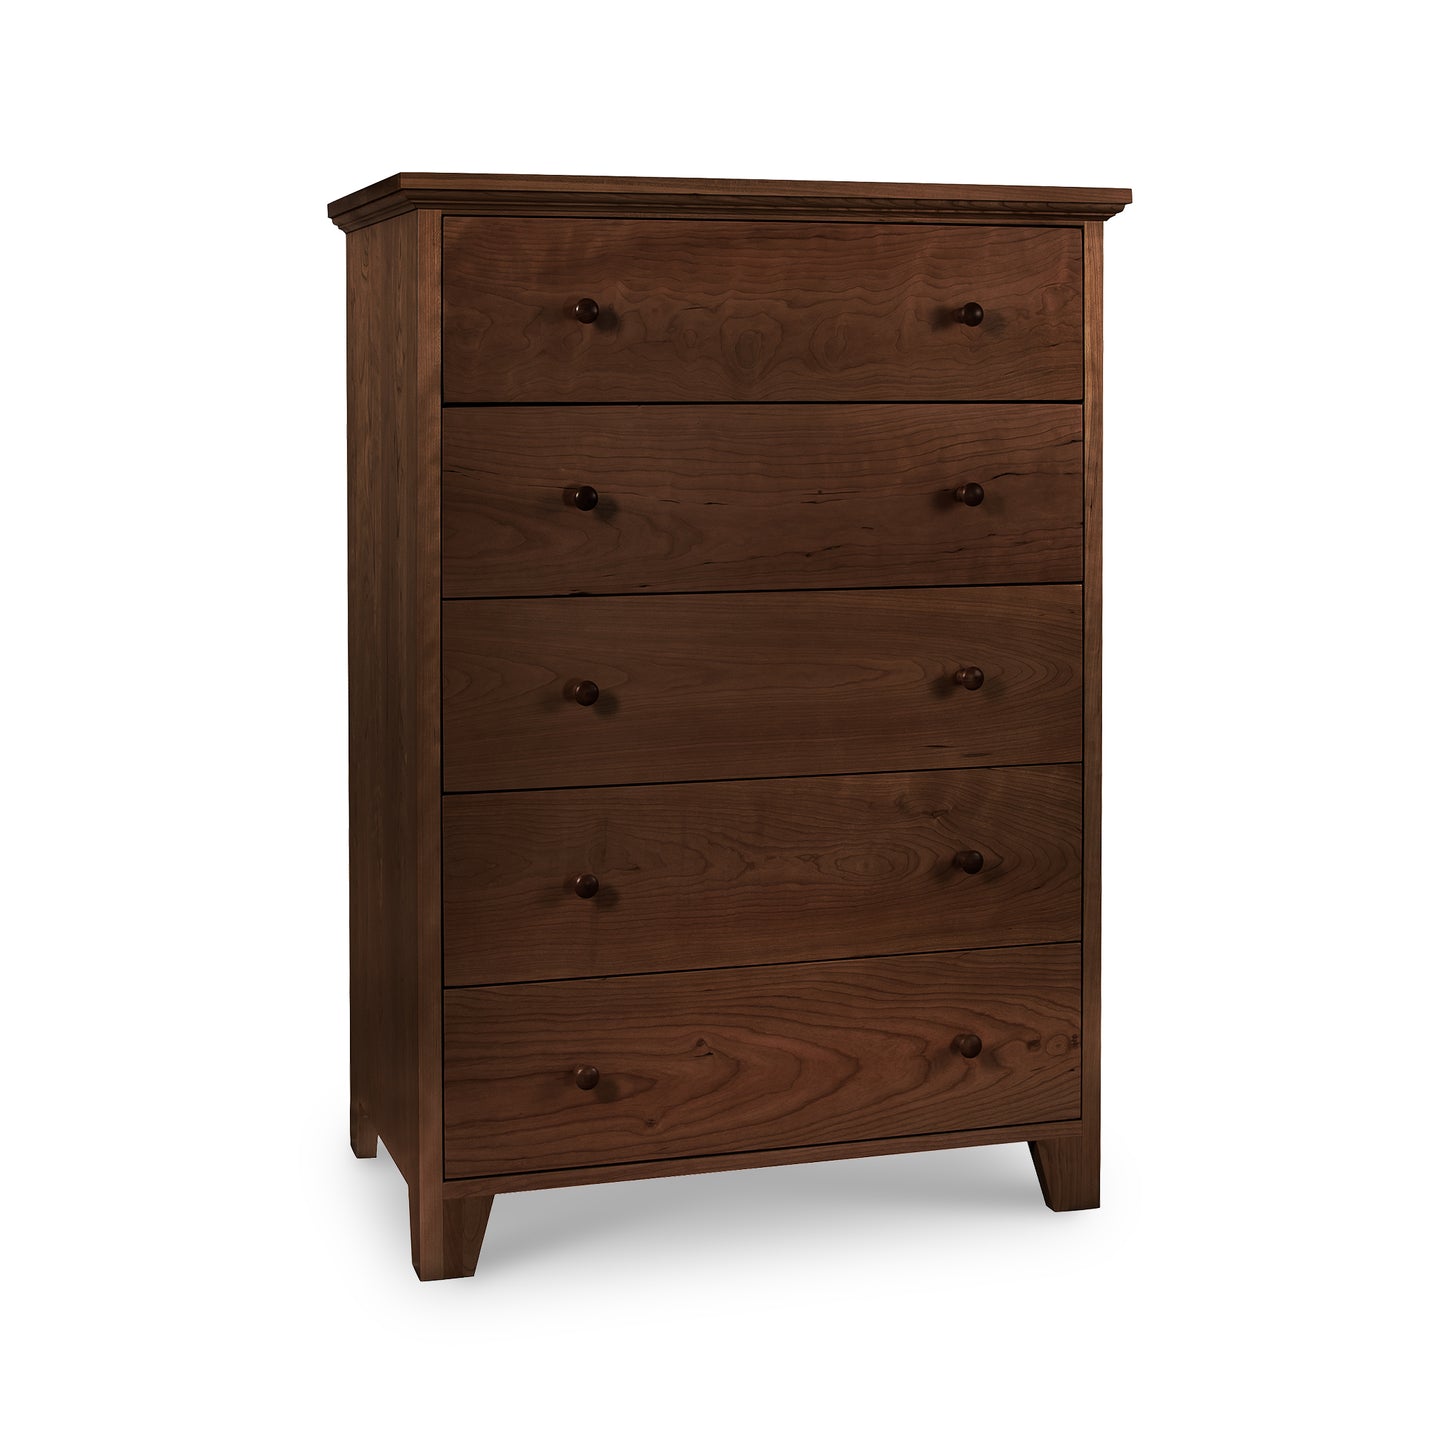 A Lyndon Furniture American Country 5-Drawer Chest, handmade and crafted from solid wood, in a rich dark brown color.